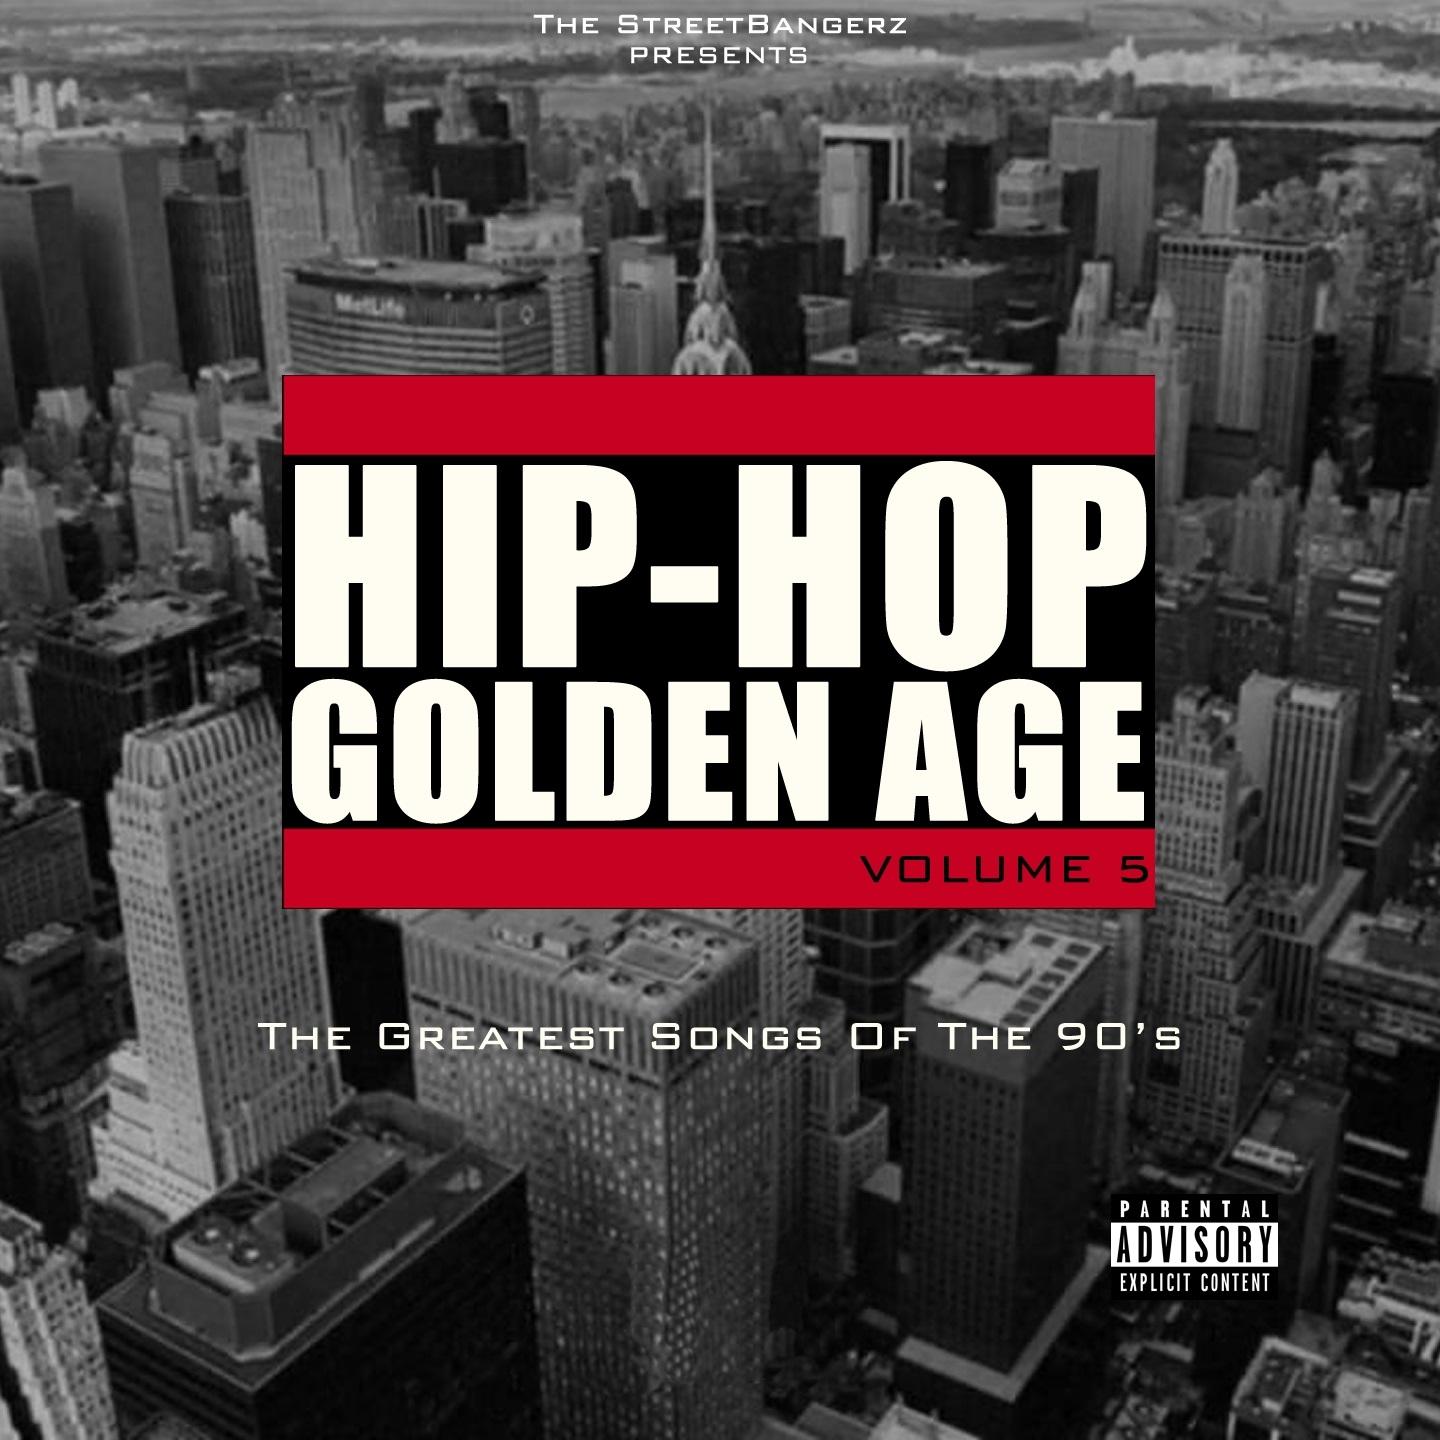 Hip-Hop Golden Age, Vol. 5 (The Greatest Songs of the 90's) [The Streetbangerz Presents]